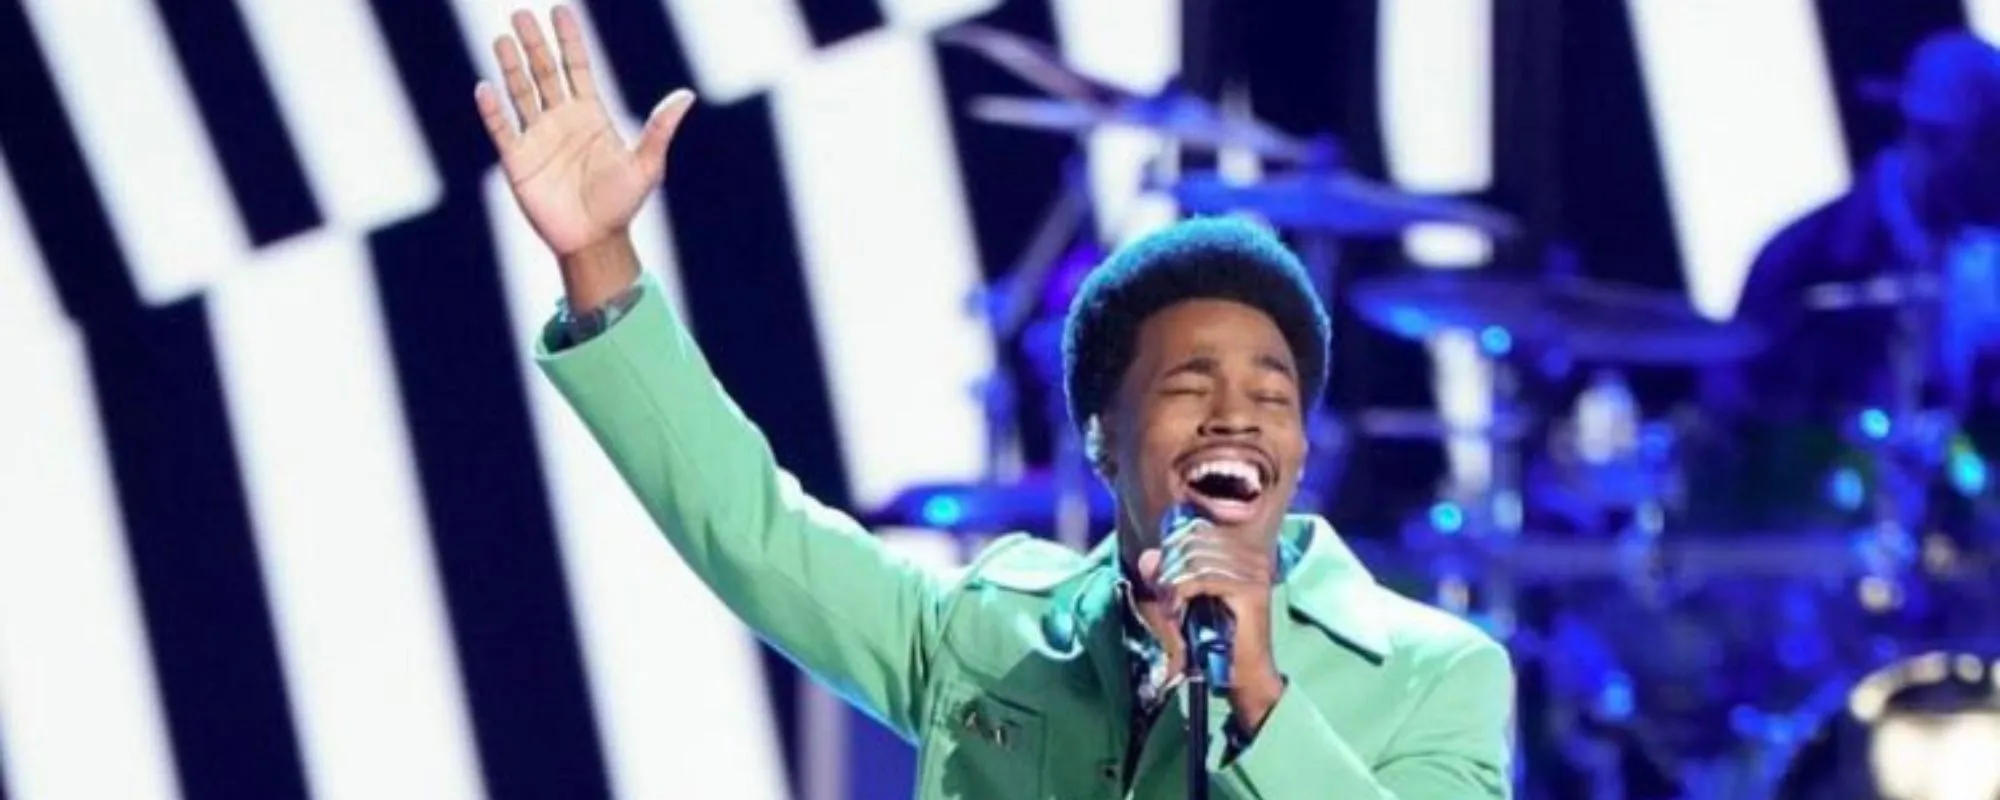 ‘The Voice’: Who Won the Instant Save?